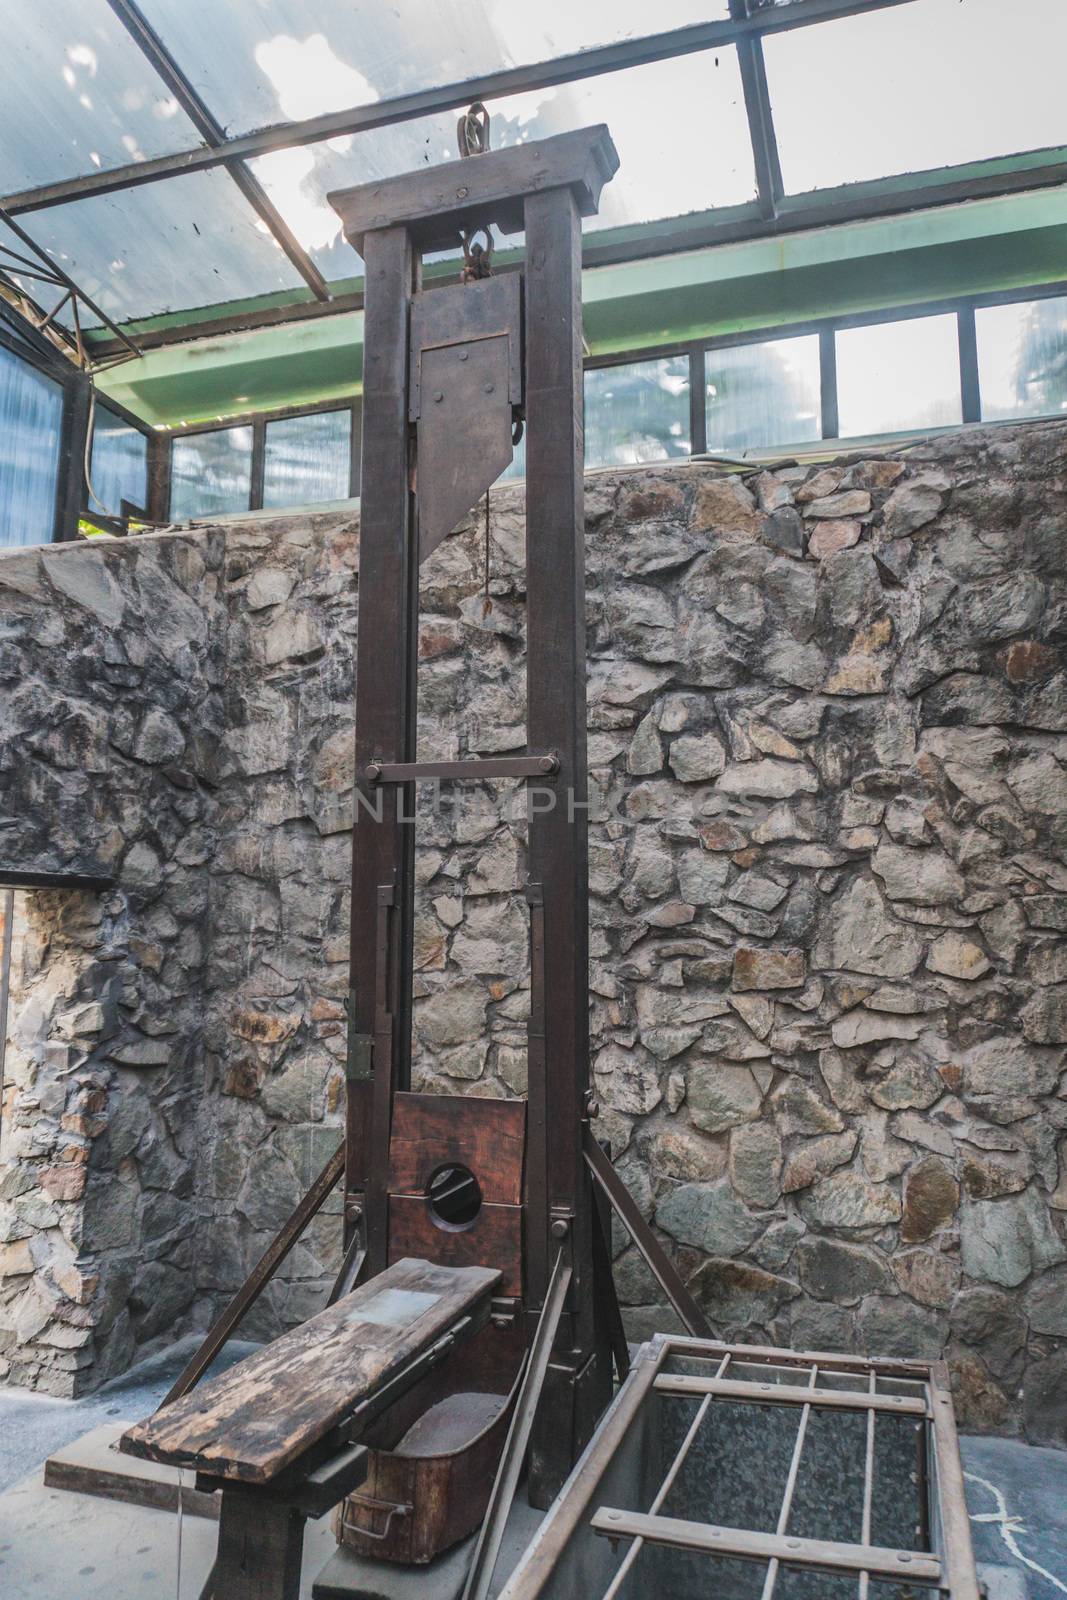 Guillotine at the Ho Chi Minh City War Museum. Vietnam